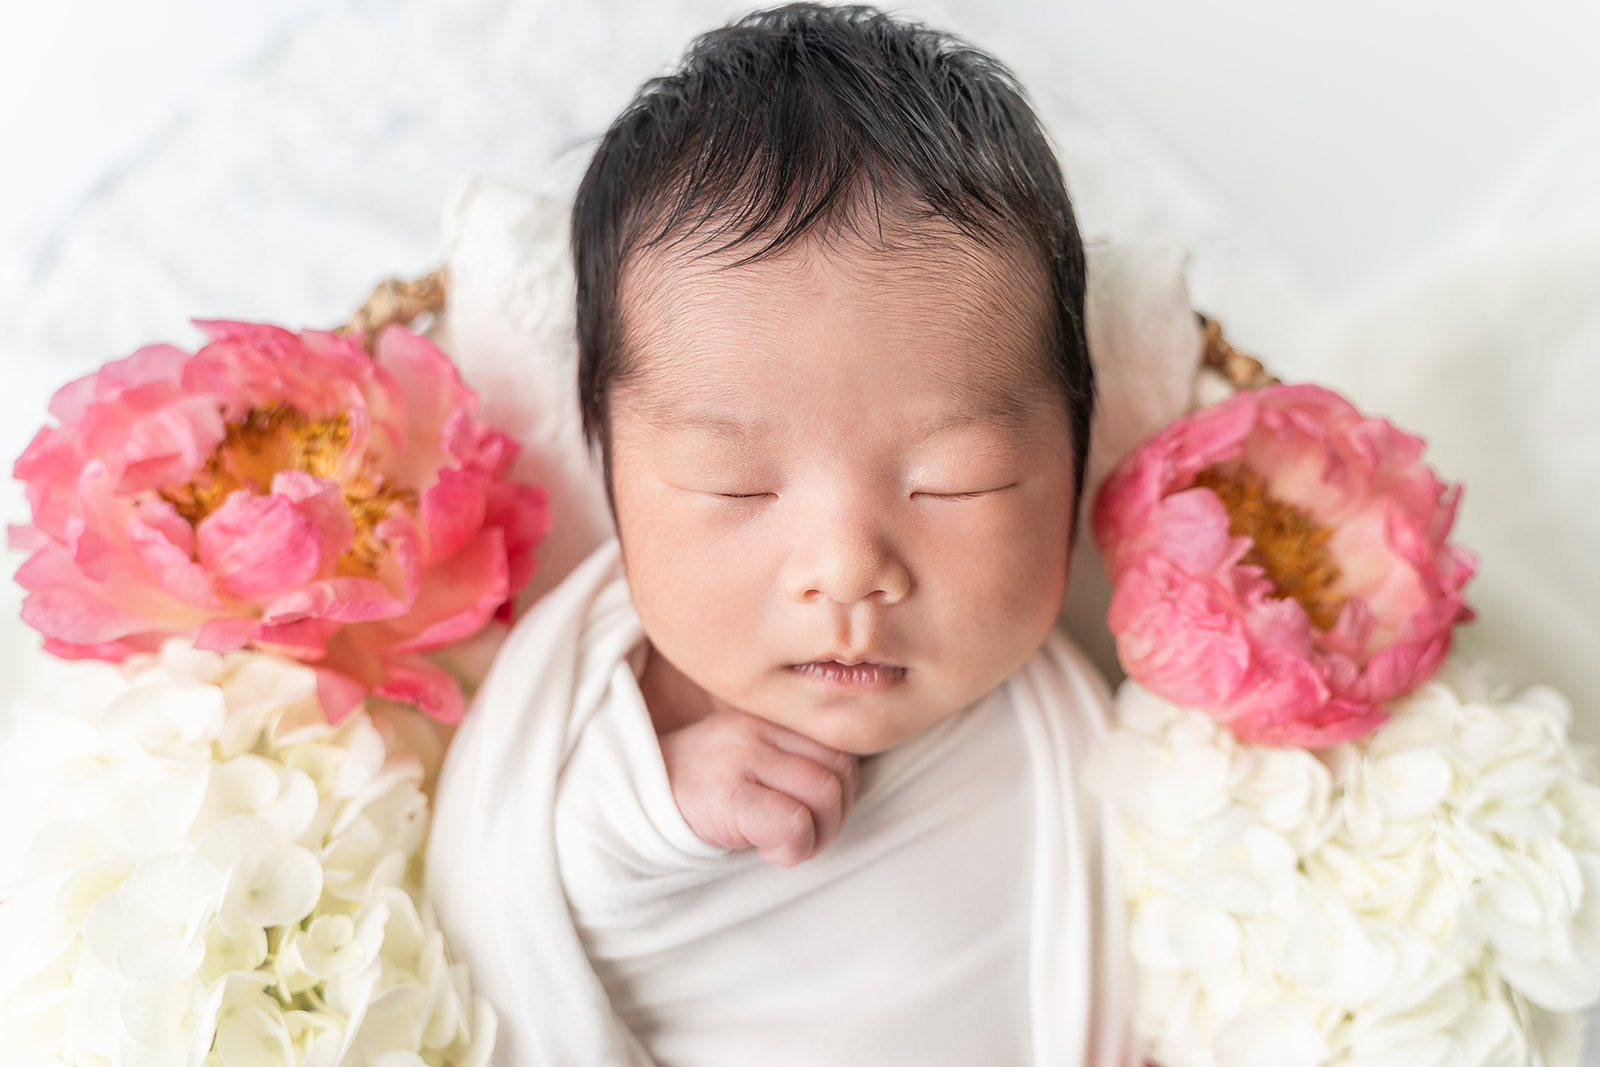 A newborn baby sleeps with a hand under her chin with pink carnations